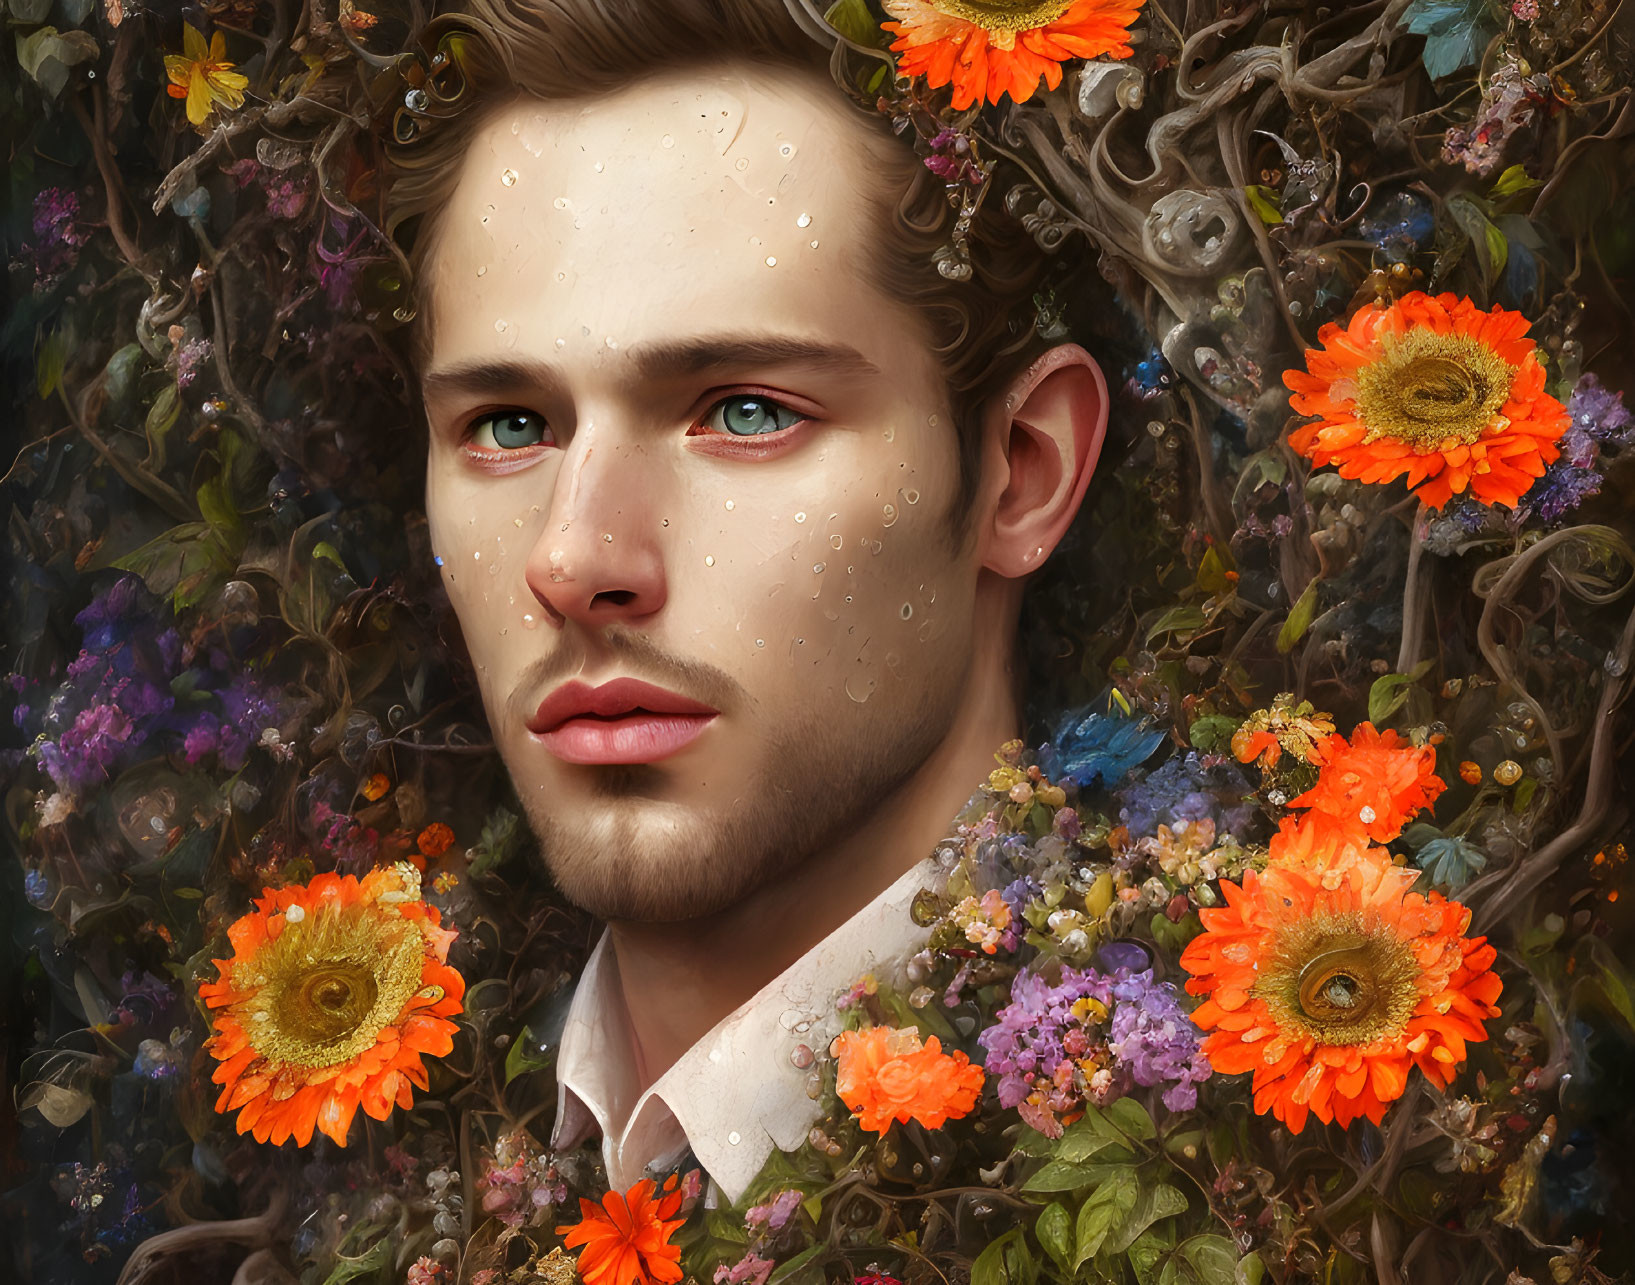 Portrait blending with vibrant orange flowers and green leaves